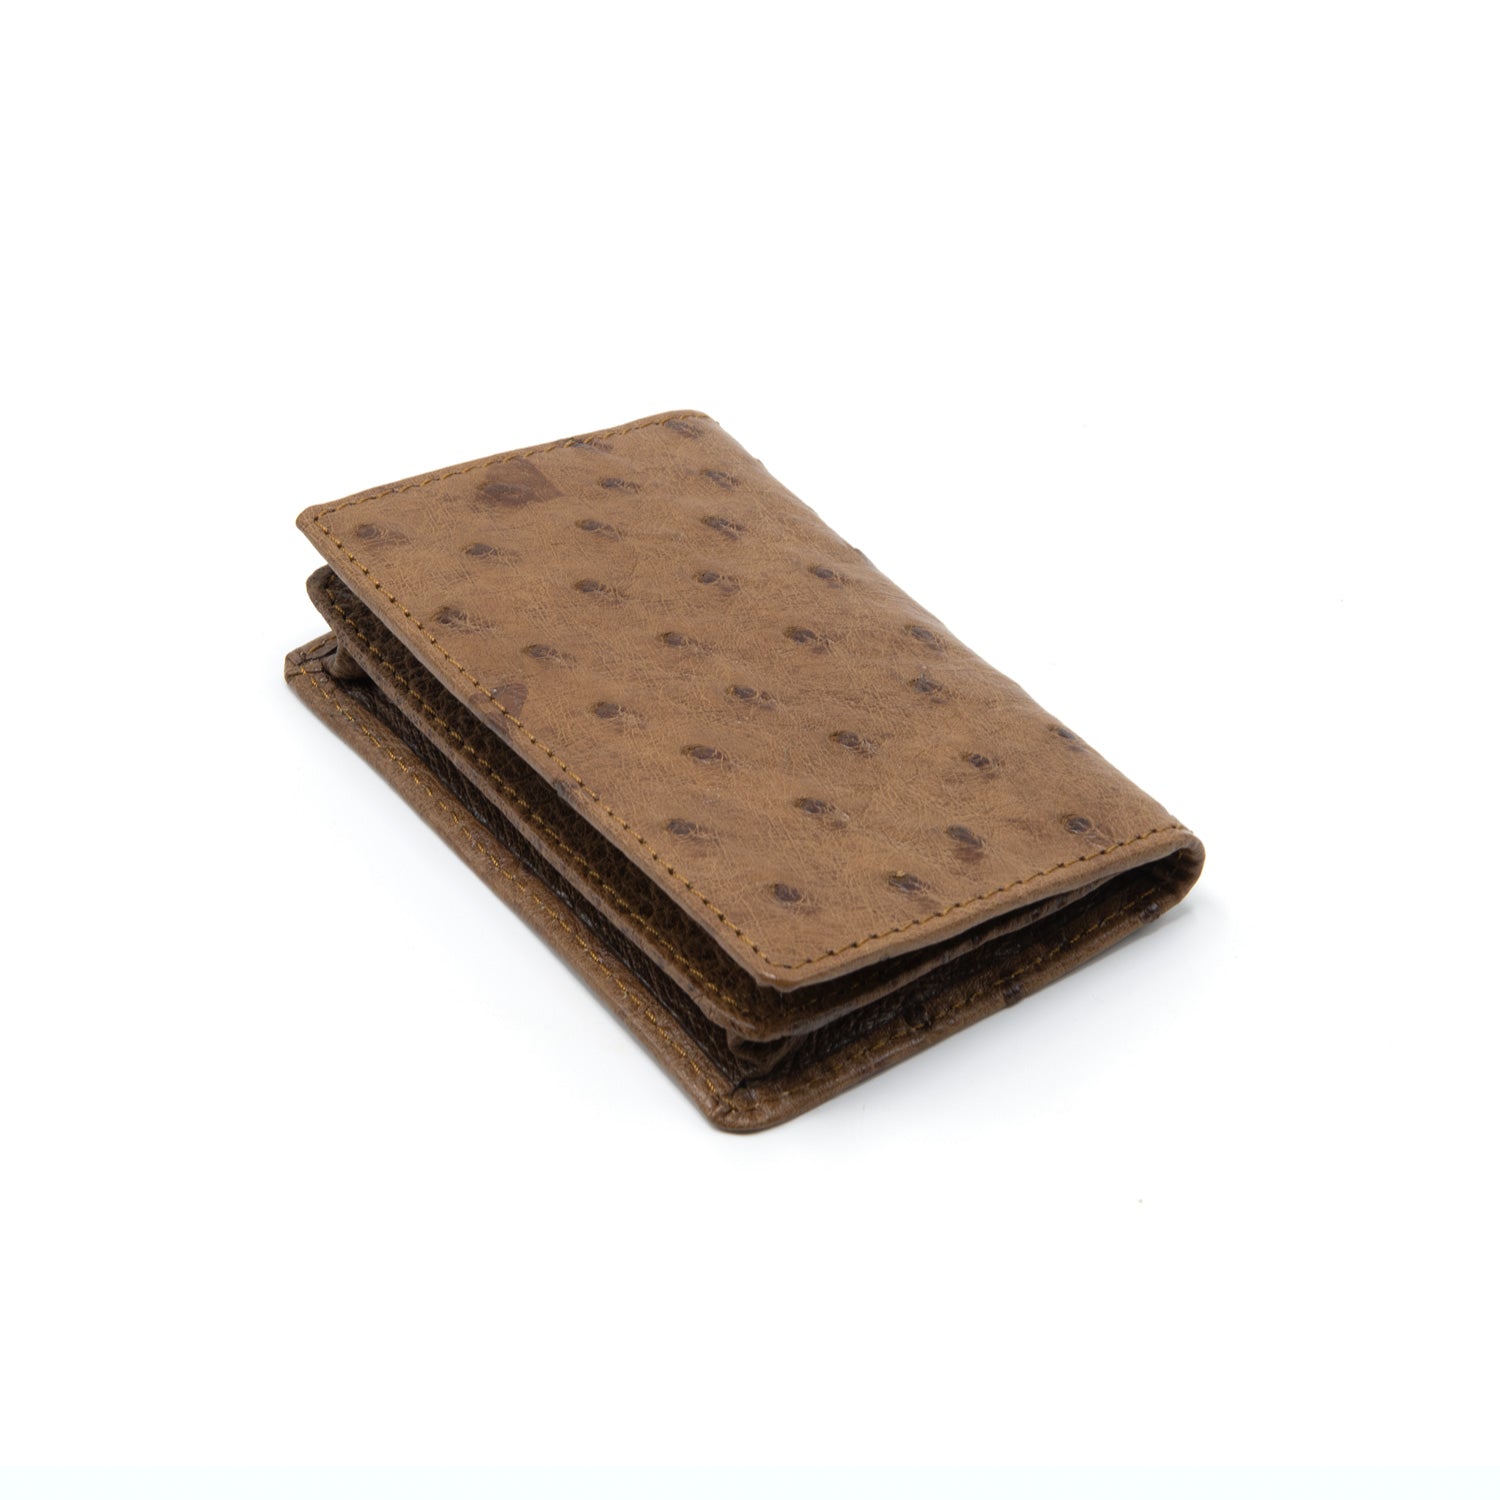 Ostrich Leather Business Card Holder Wallet - Ostrich Leather Wallet